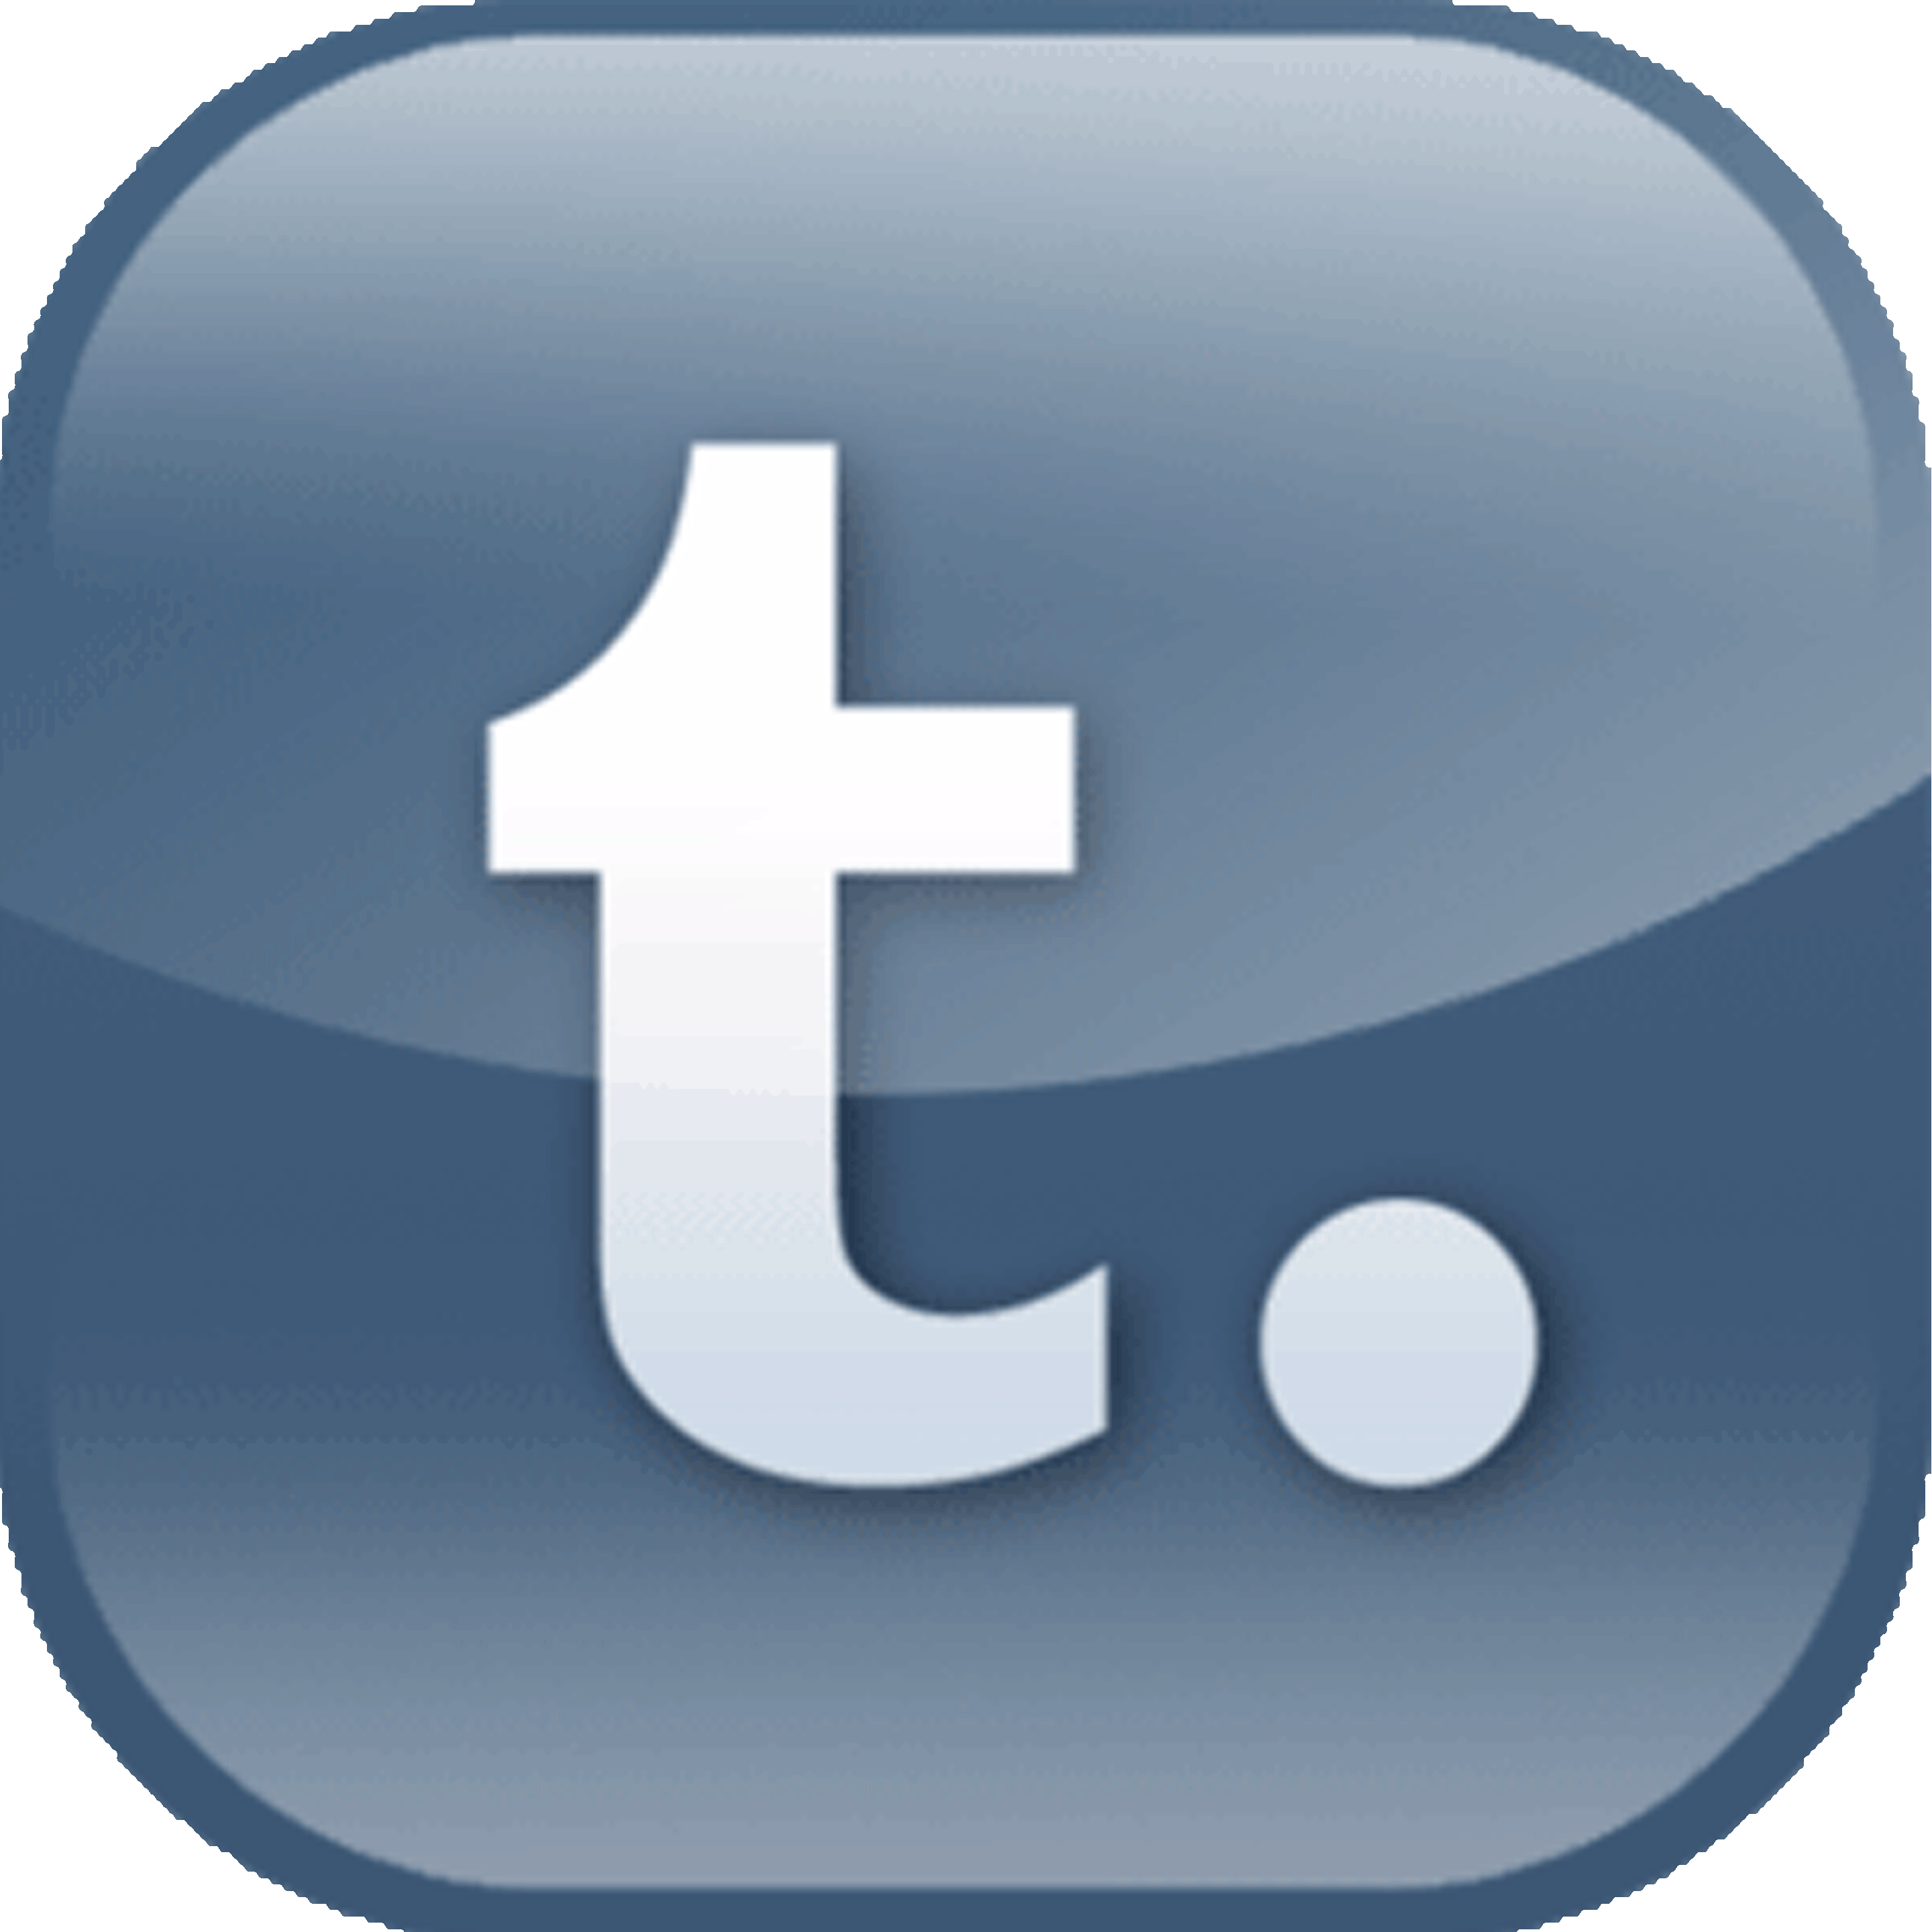 Tumblr Logo Simple PNG Transparent Background, Free Download #16098 - FreeI...